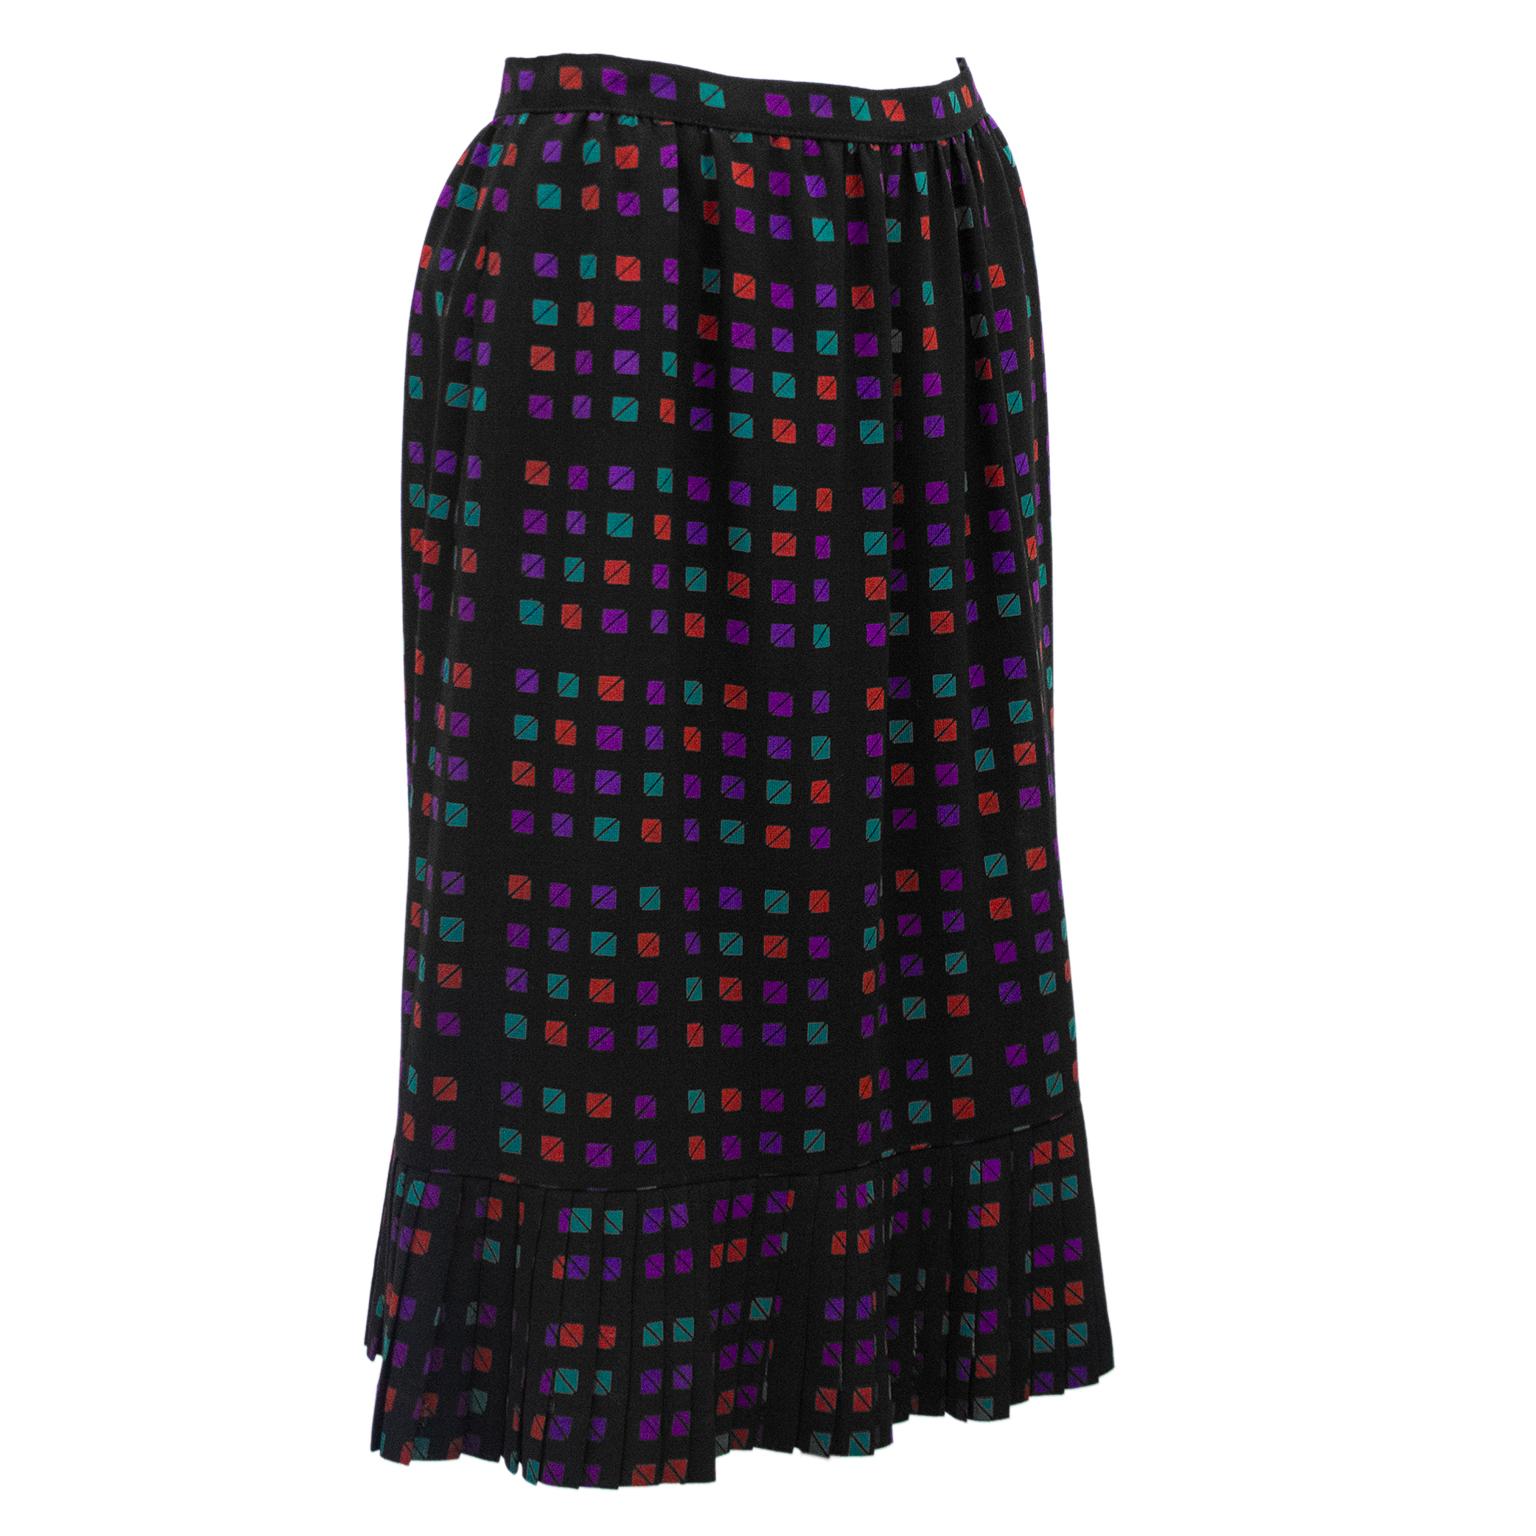 Fun & flirty 1970s Celine skirt. Black with turquoise, purple and red allover triangle/square geometric pattern. High waisted with slight aline shape and pleated hem. Excellent vintage condition. Fits like a US size 2